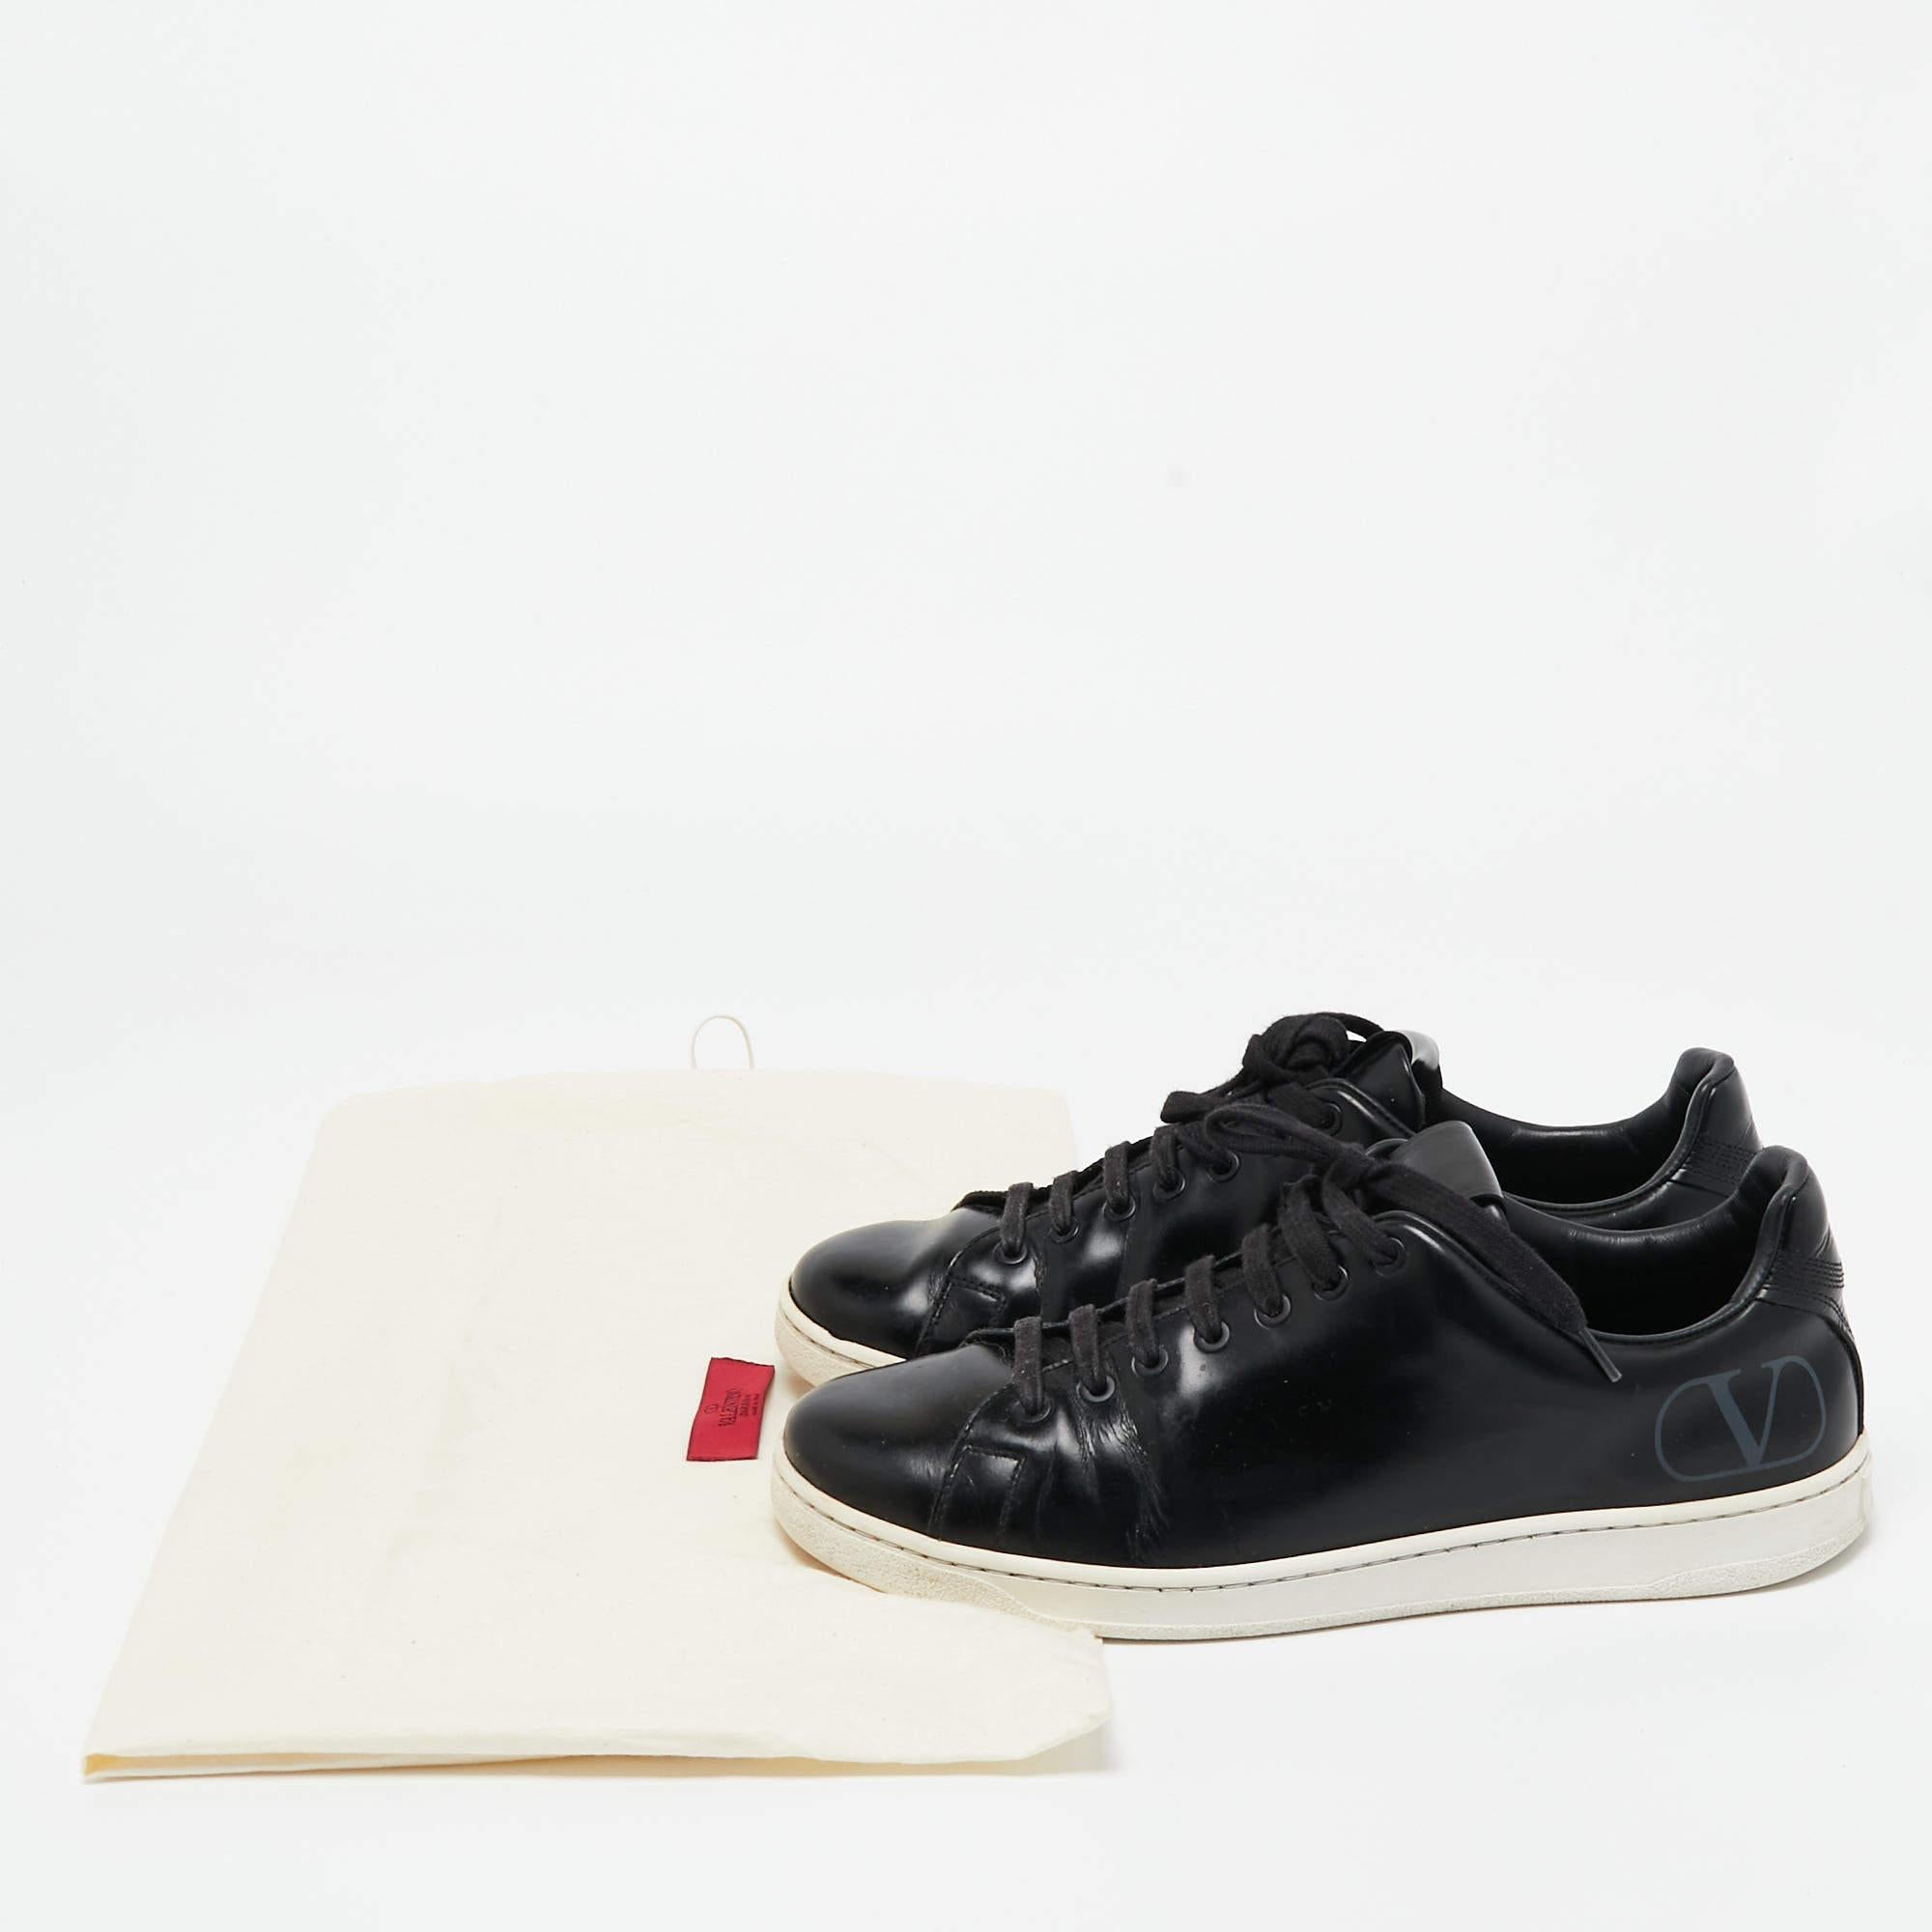 Valentino Black Leather VLogo Low Top Sneakers Size 42.5 For Sale 4